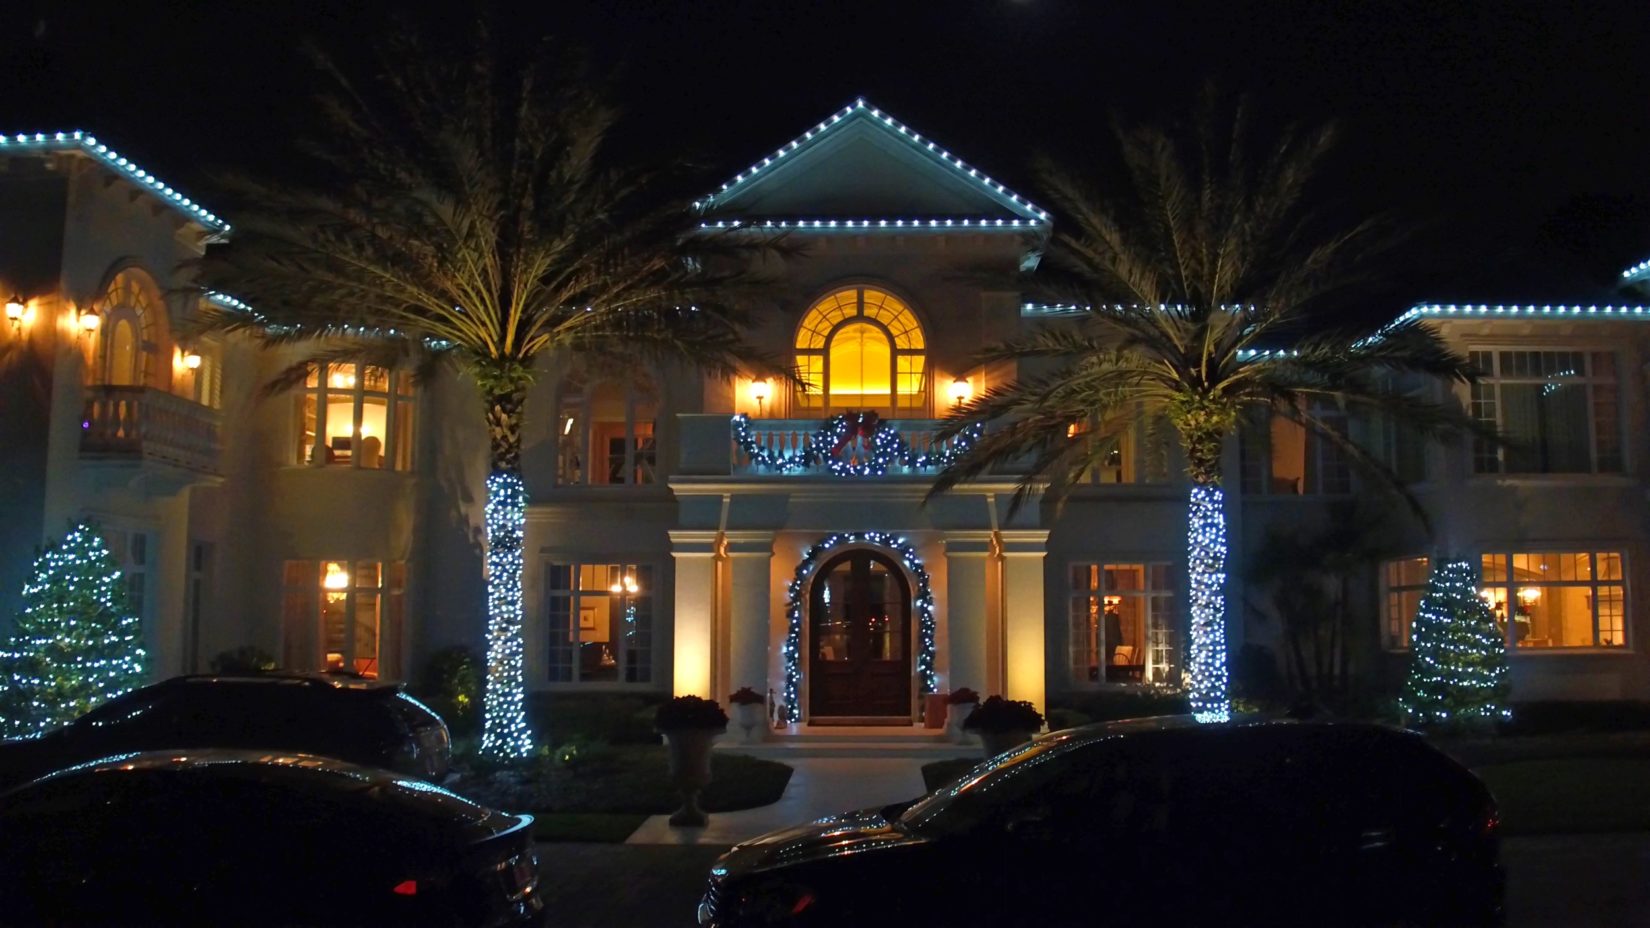 Holiday outdoor lighting design on large two-story home at night - Landscape lighting Orlando